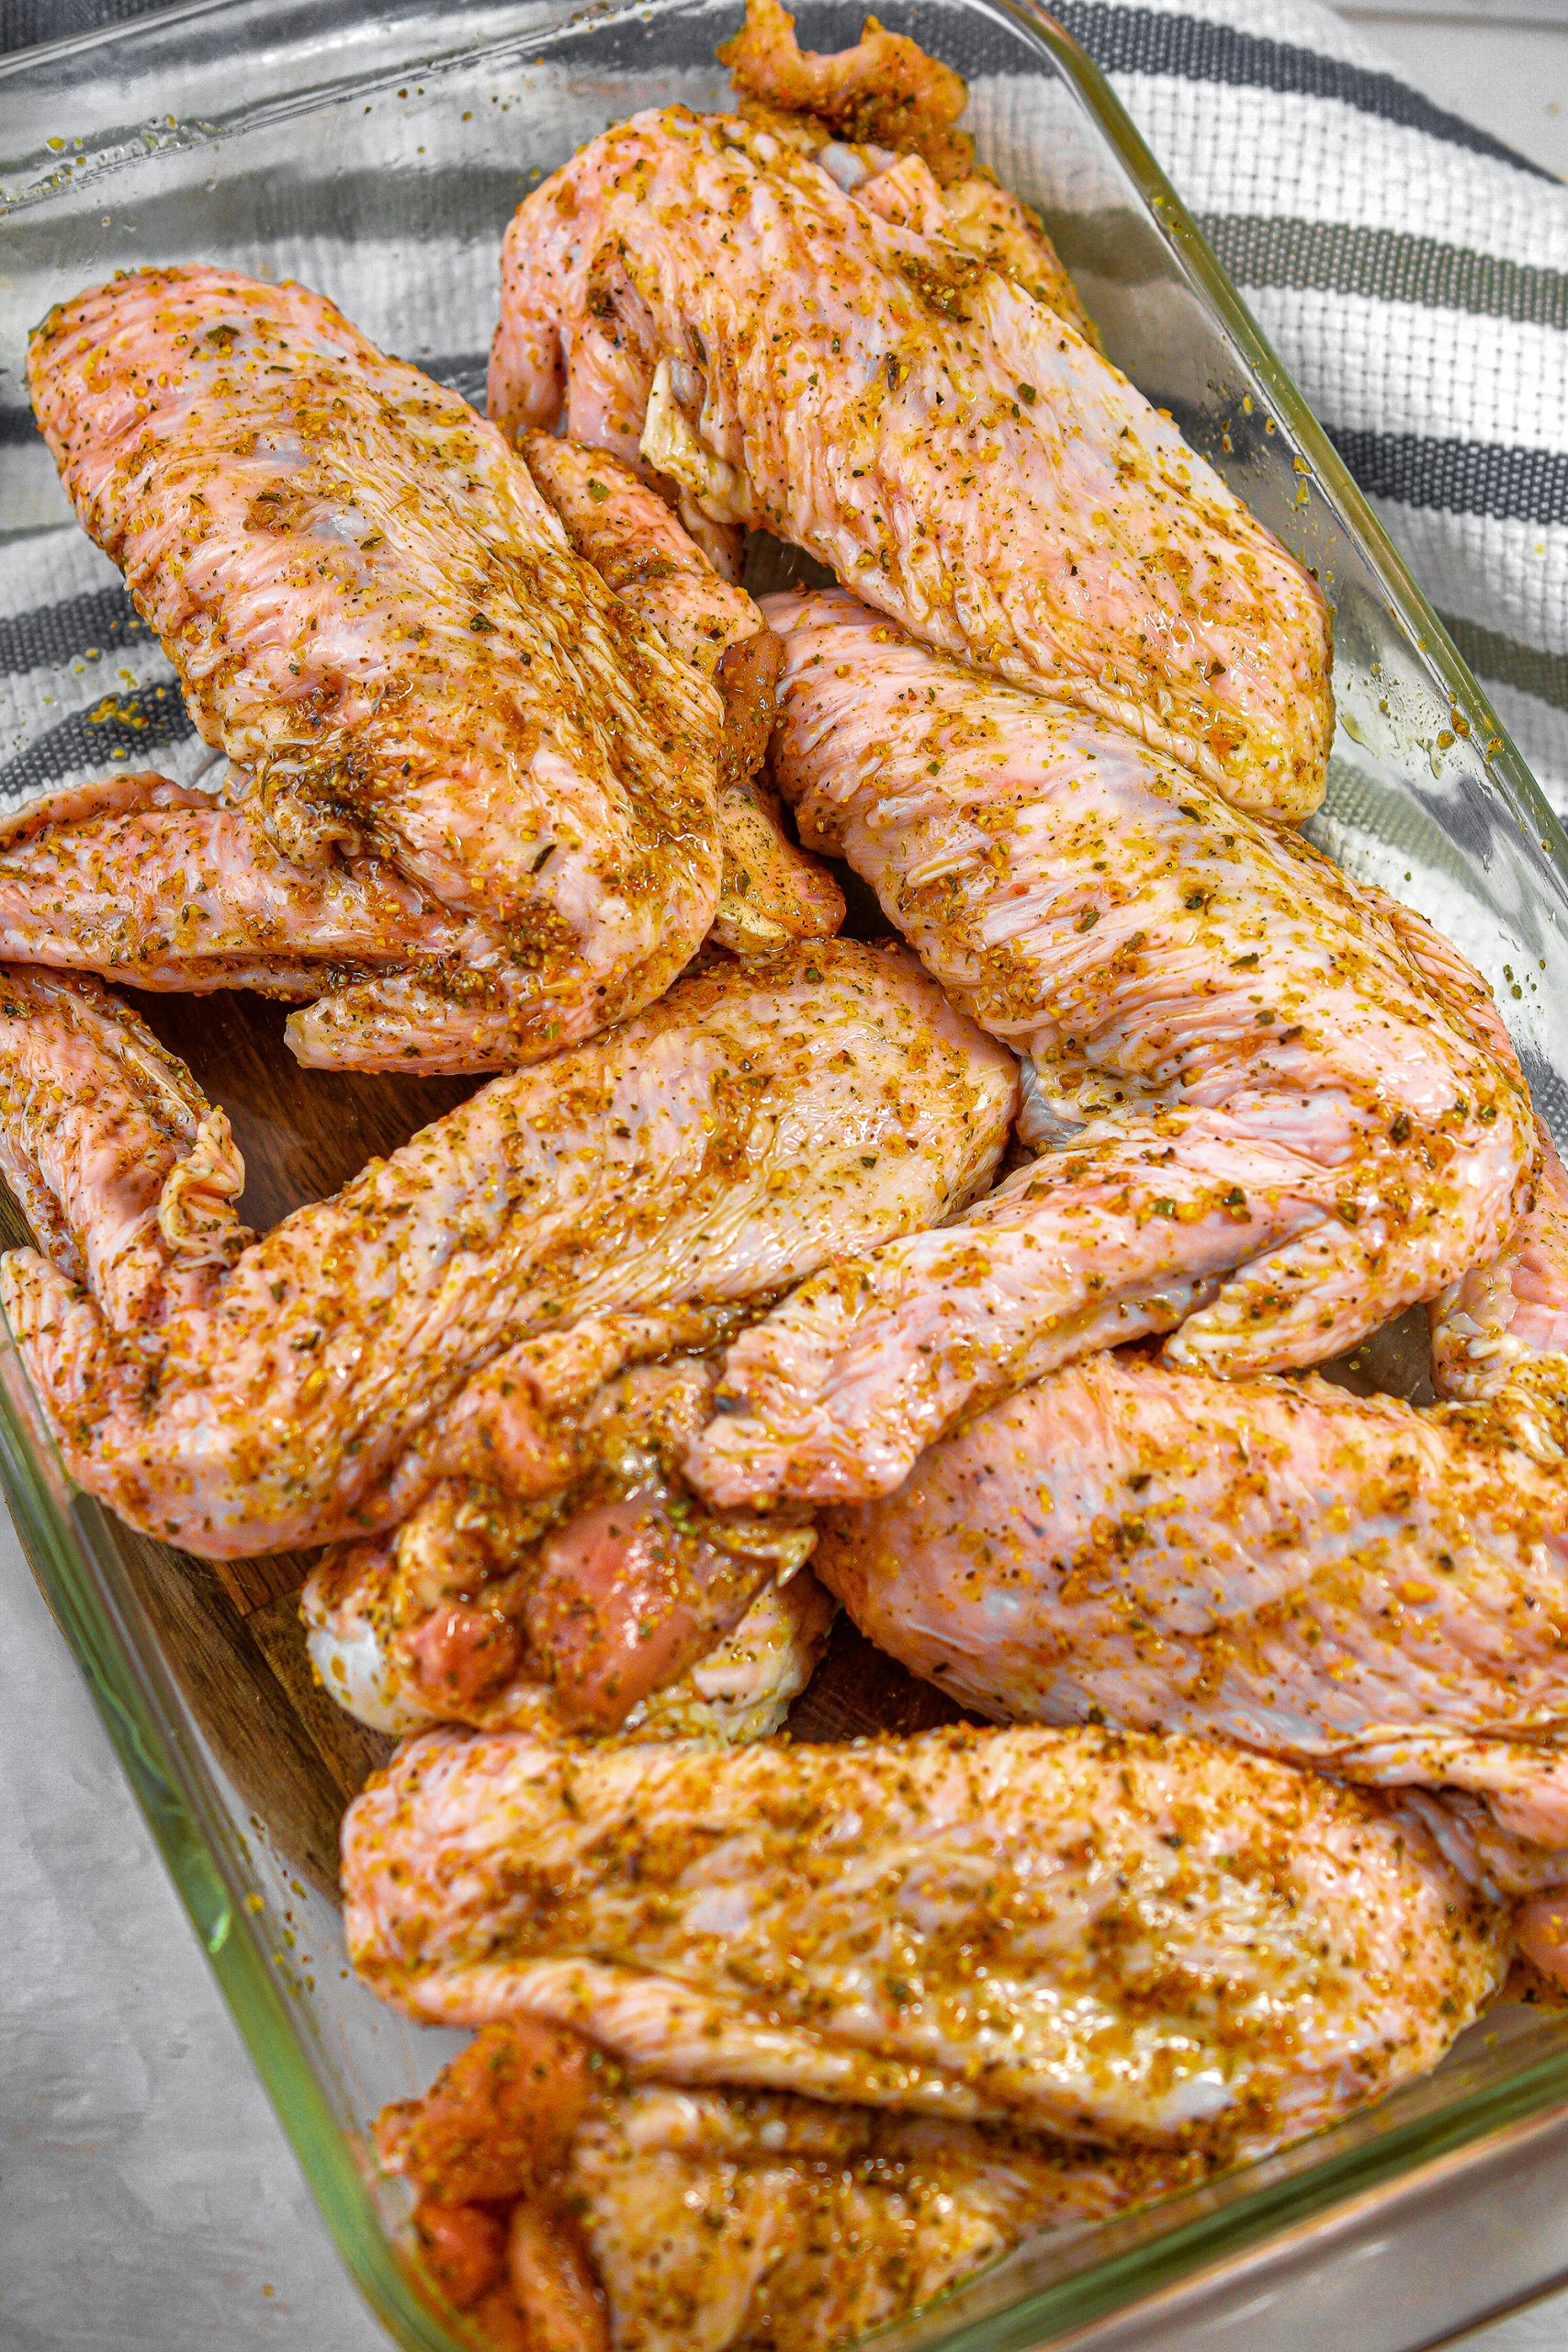 Place the wings into a 9x13 casserole dish or roasting pan and cover with aluminium foil.